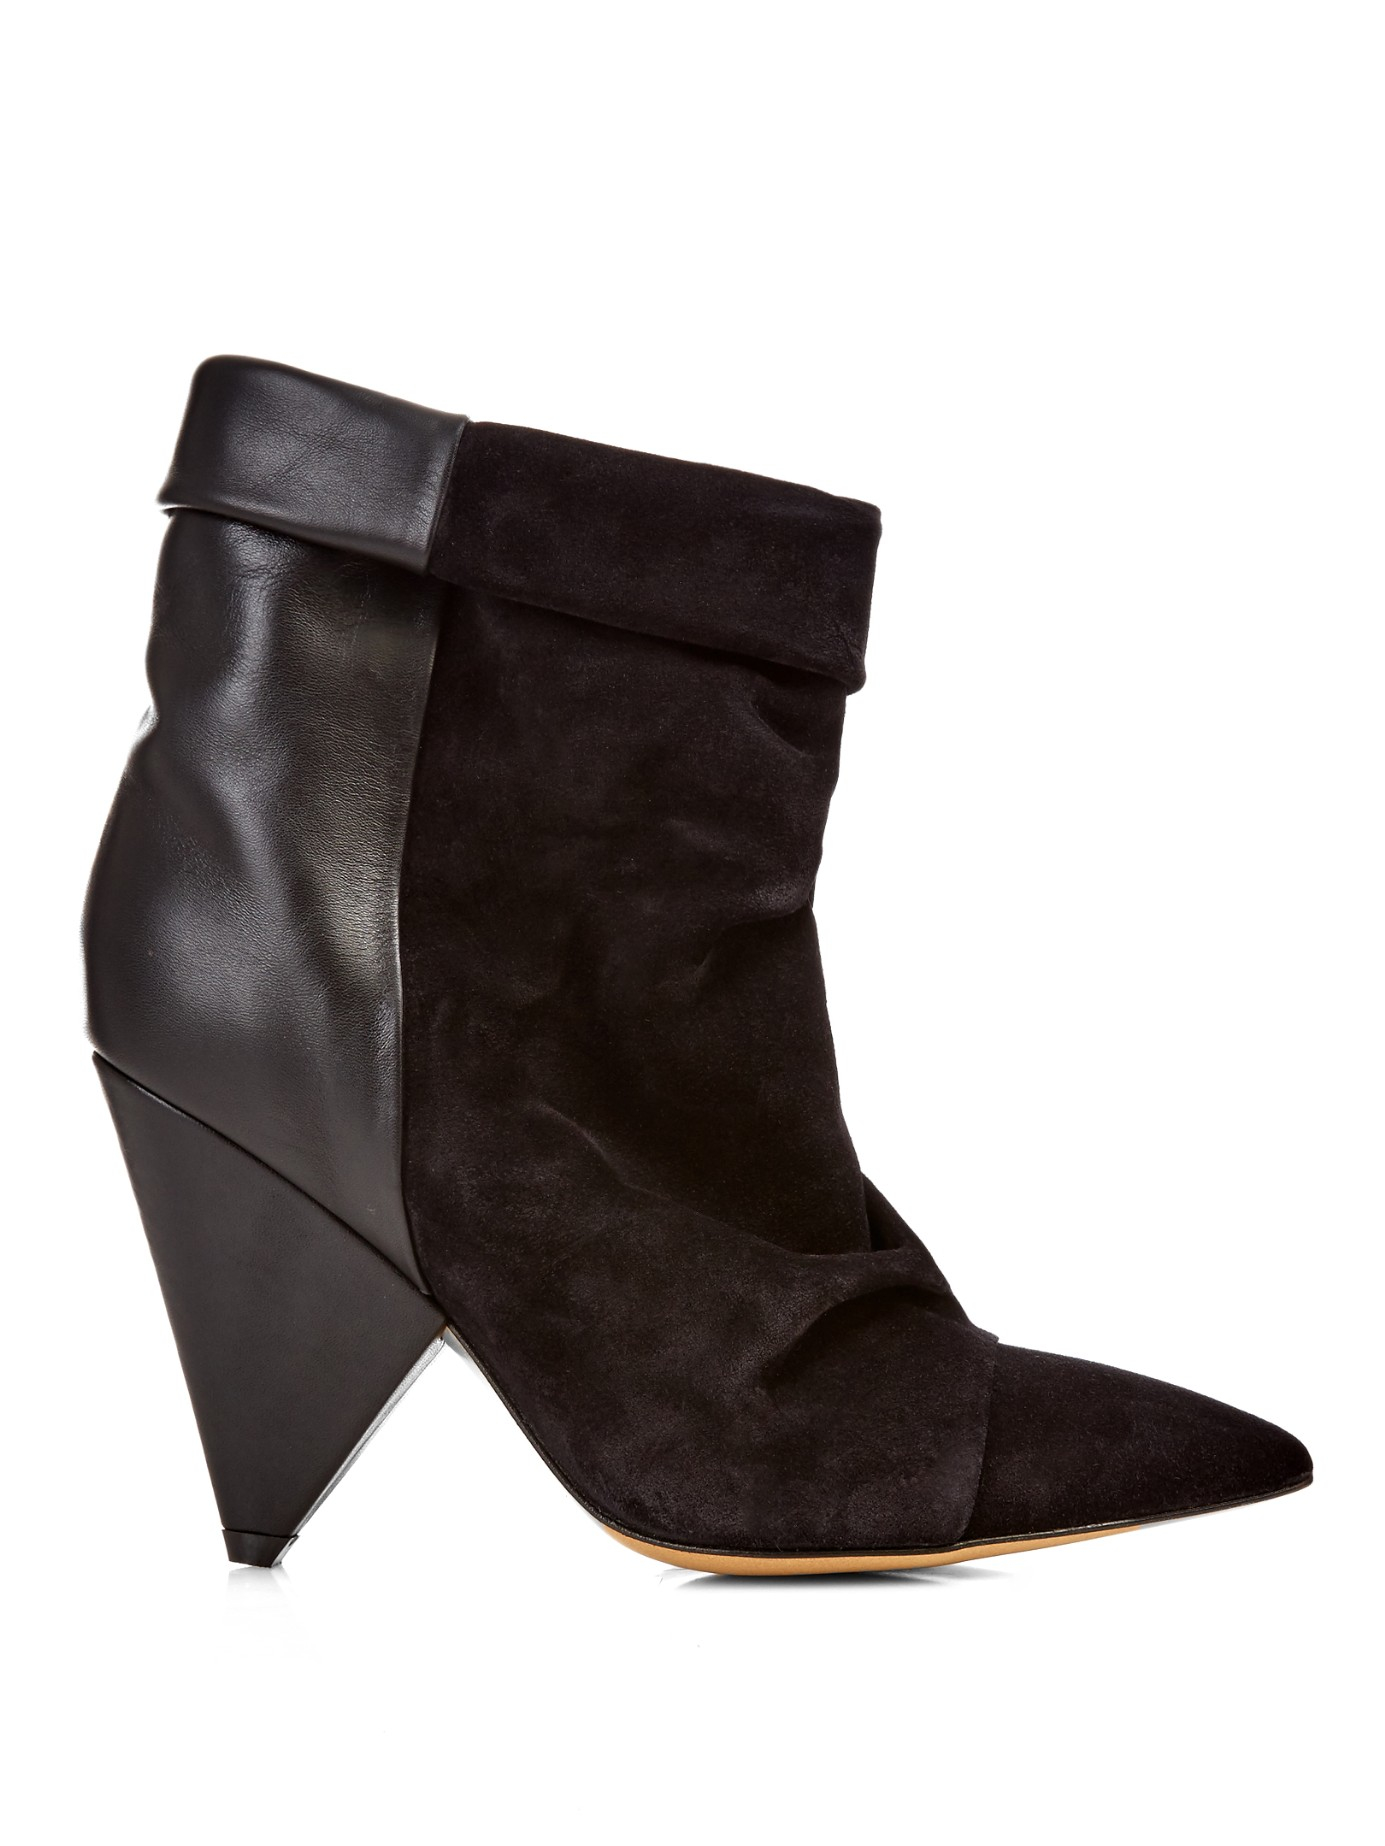 Lyst - Isabel Marant Andrew Leather And Suede Ankle Boots in Black